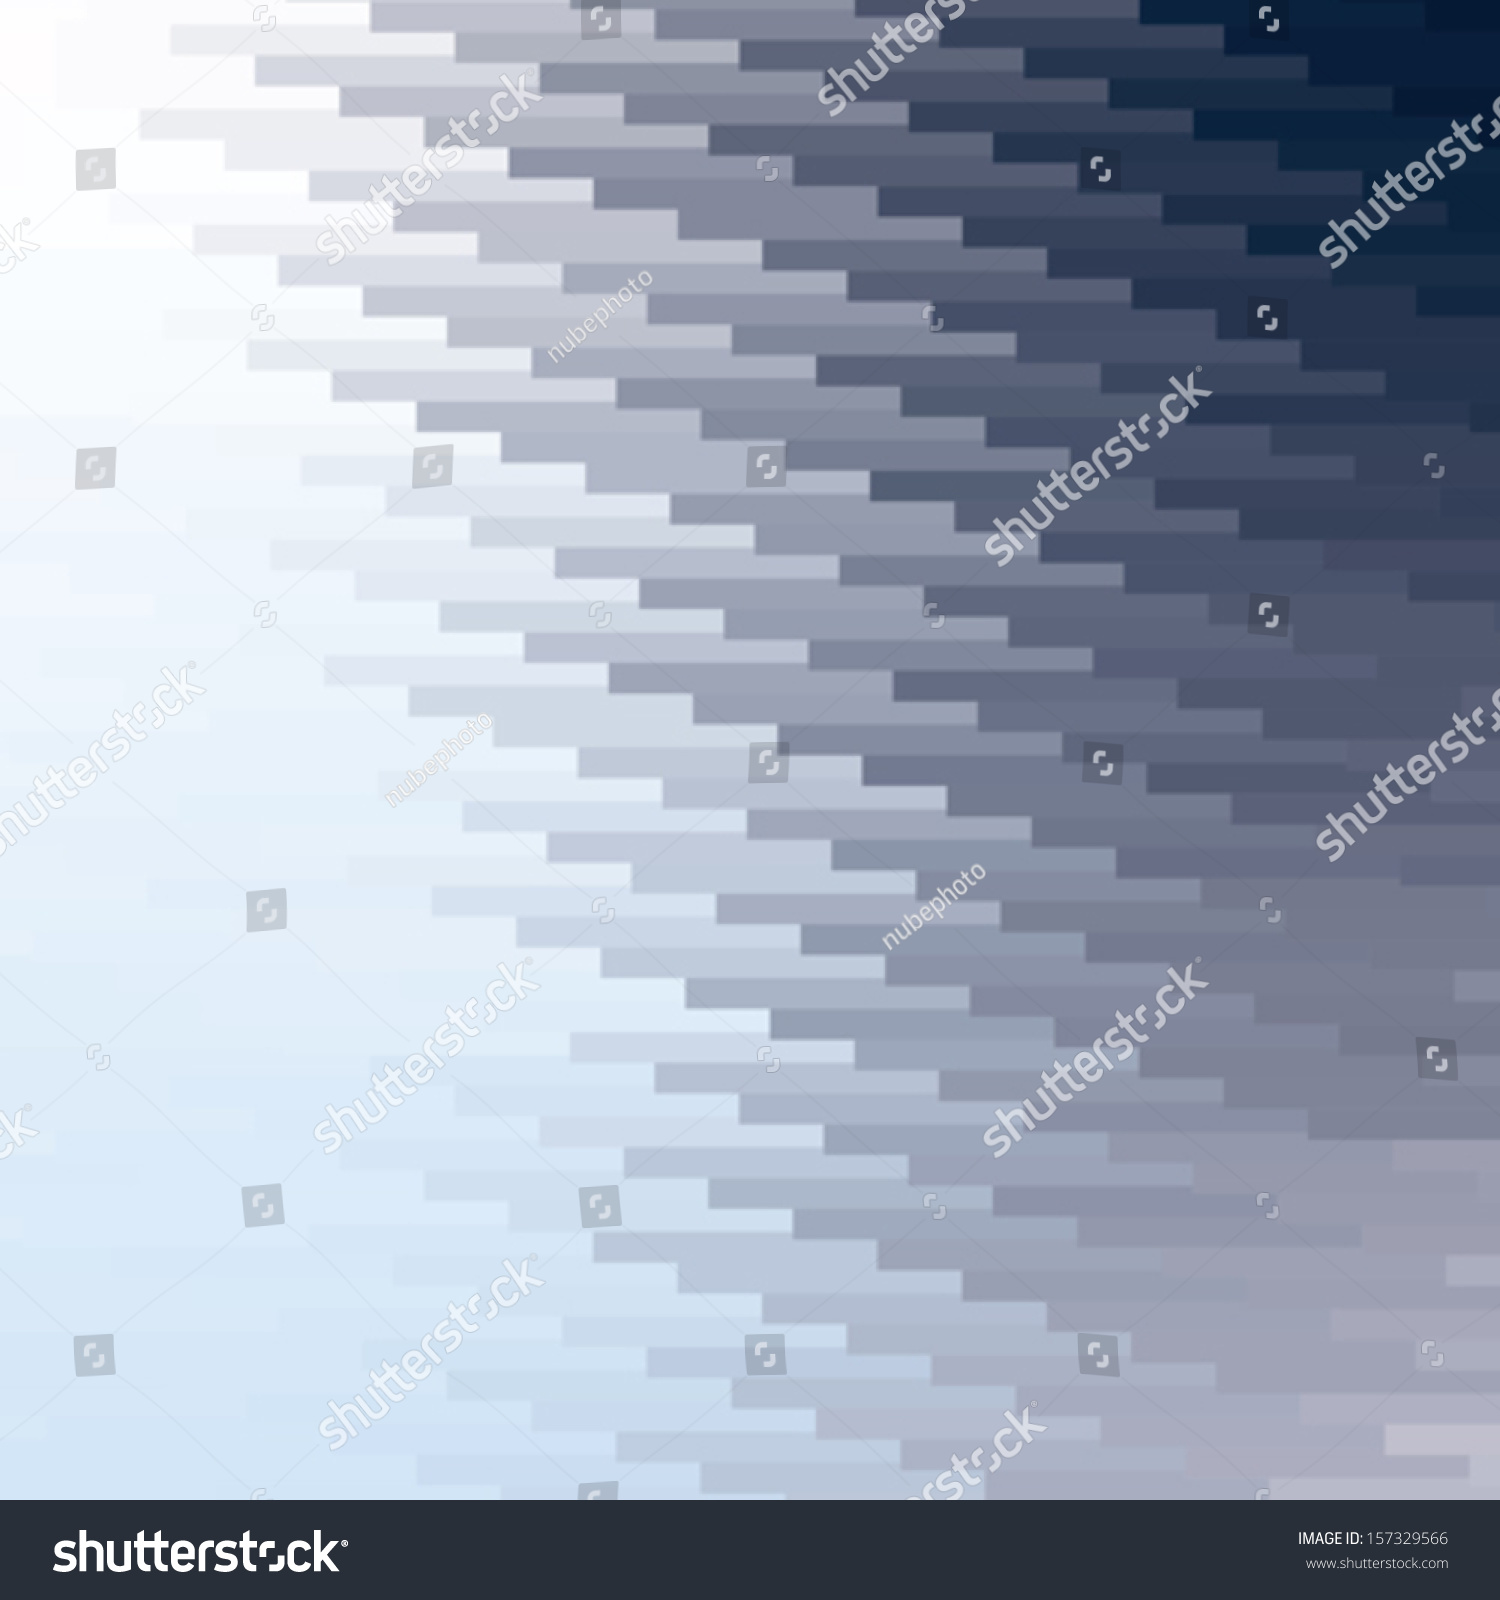 Colorful Mosaic Banner Background, Abstract Vector Illustration